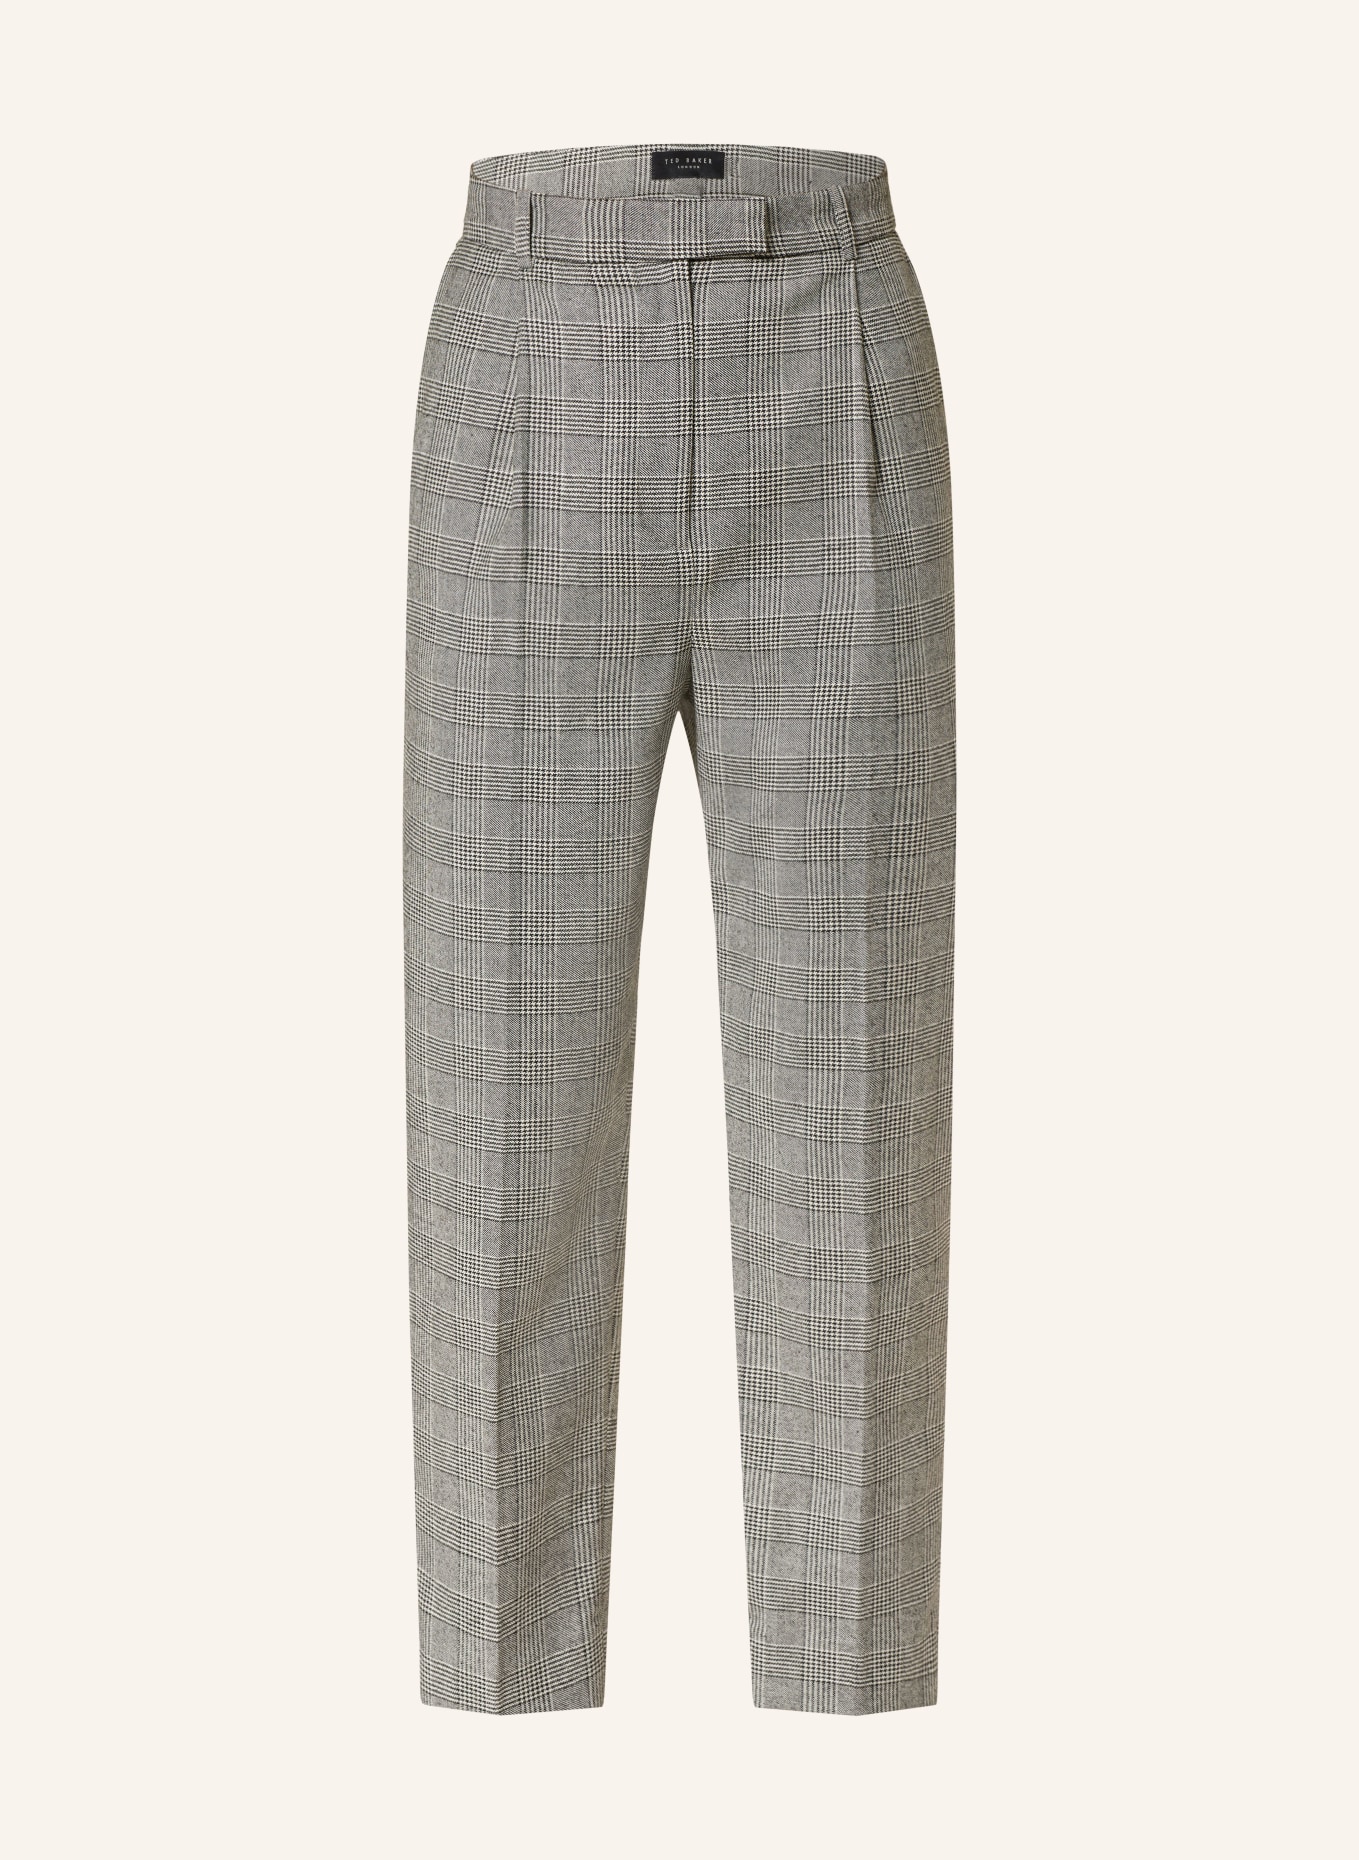 TED BAKER Trousers JOMMIAL, Color: GRAY/ LIGHT GRAY/ BLACK (Image 1)